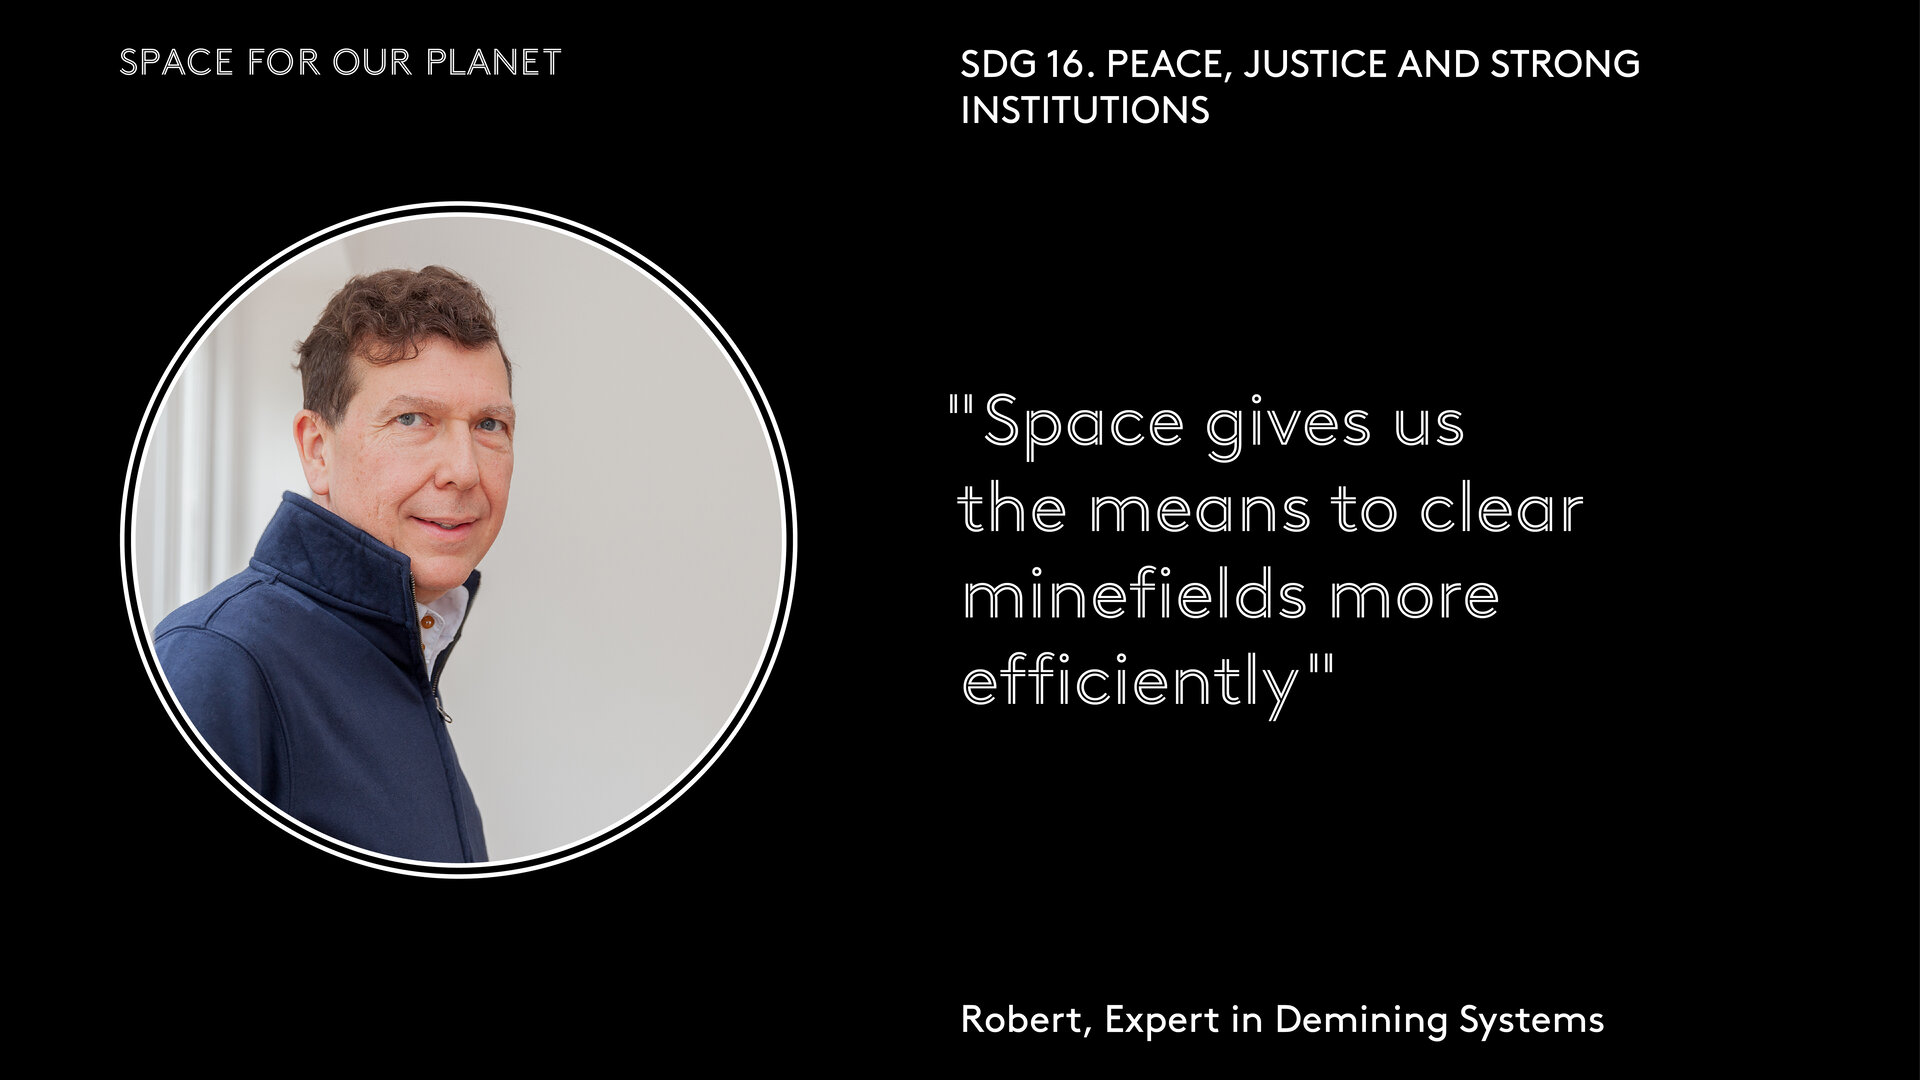 "Space gives us the means to clear minefields more efficiently"